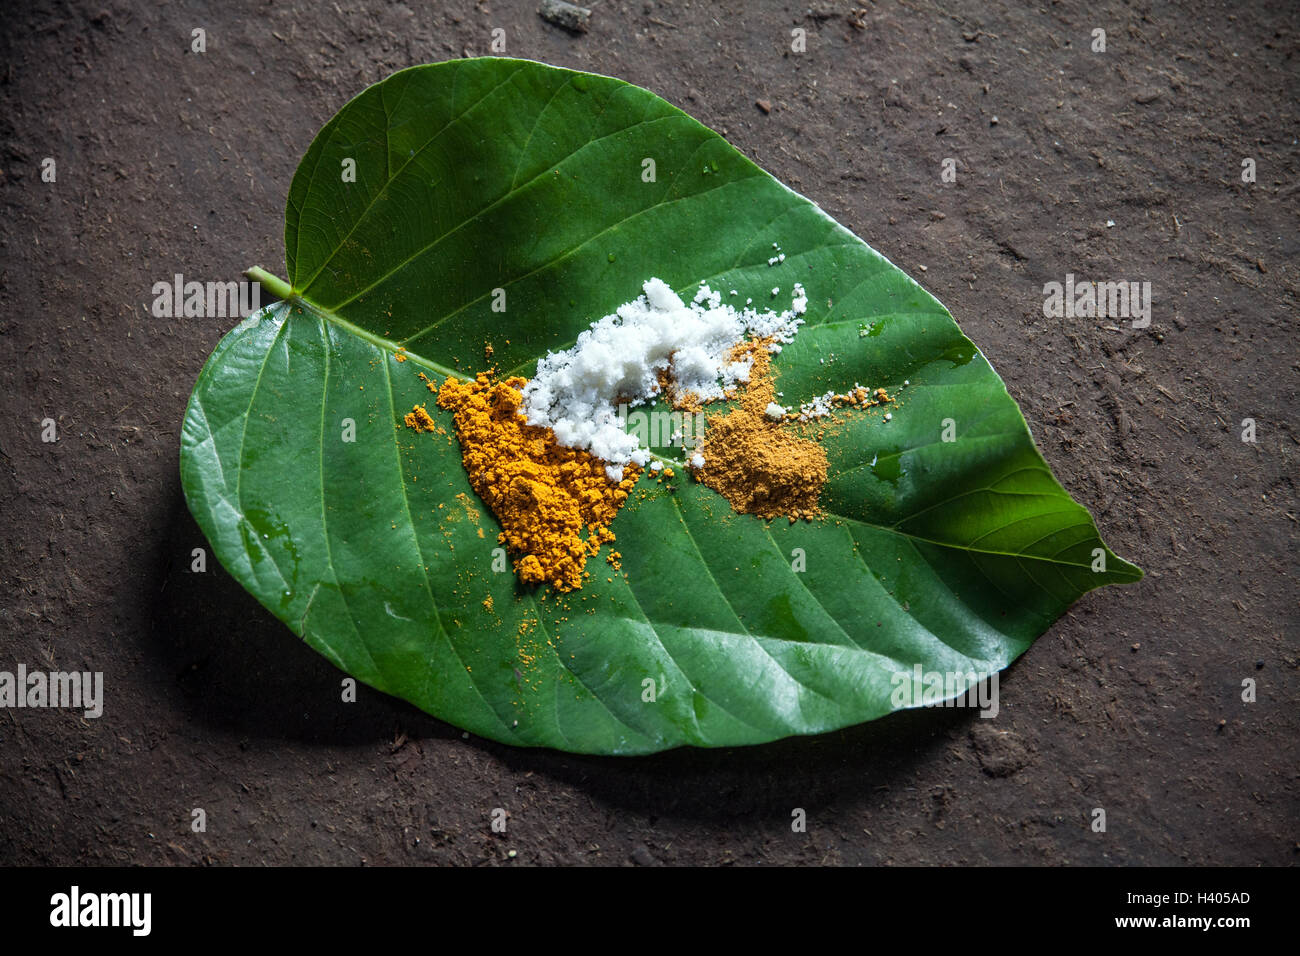 Spices on a leaf for cooking in Jharkhand, India Stock Photo